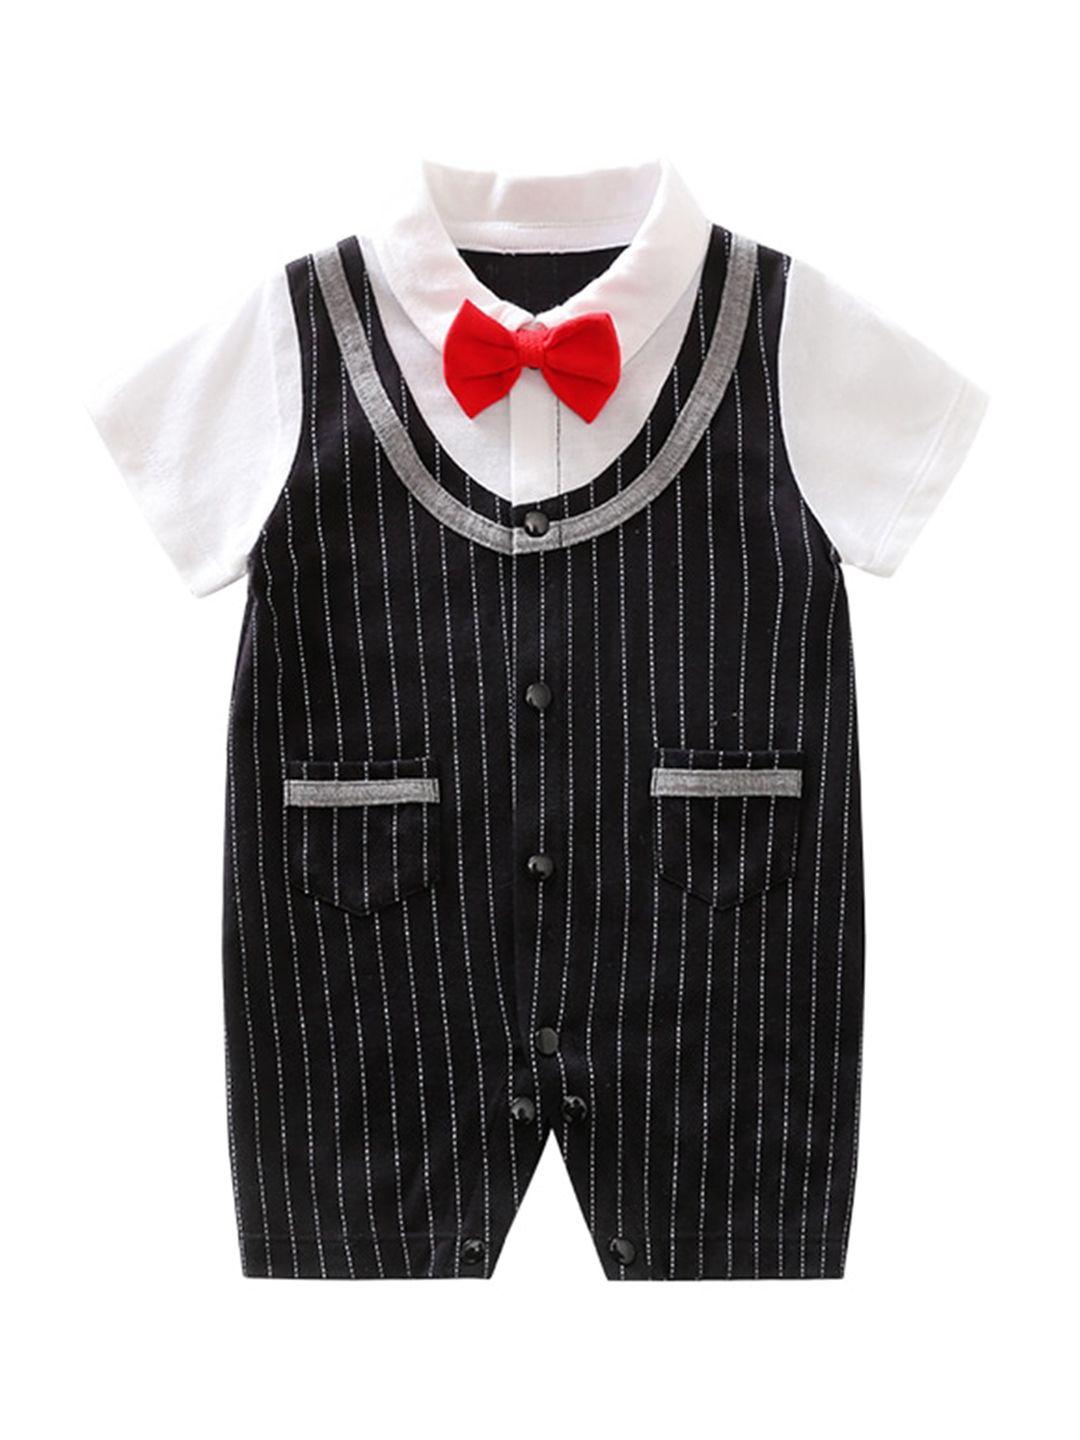 stylecast-infant-boys-black-&-white-striped-cotton-rompers